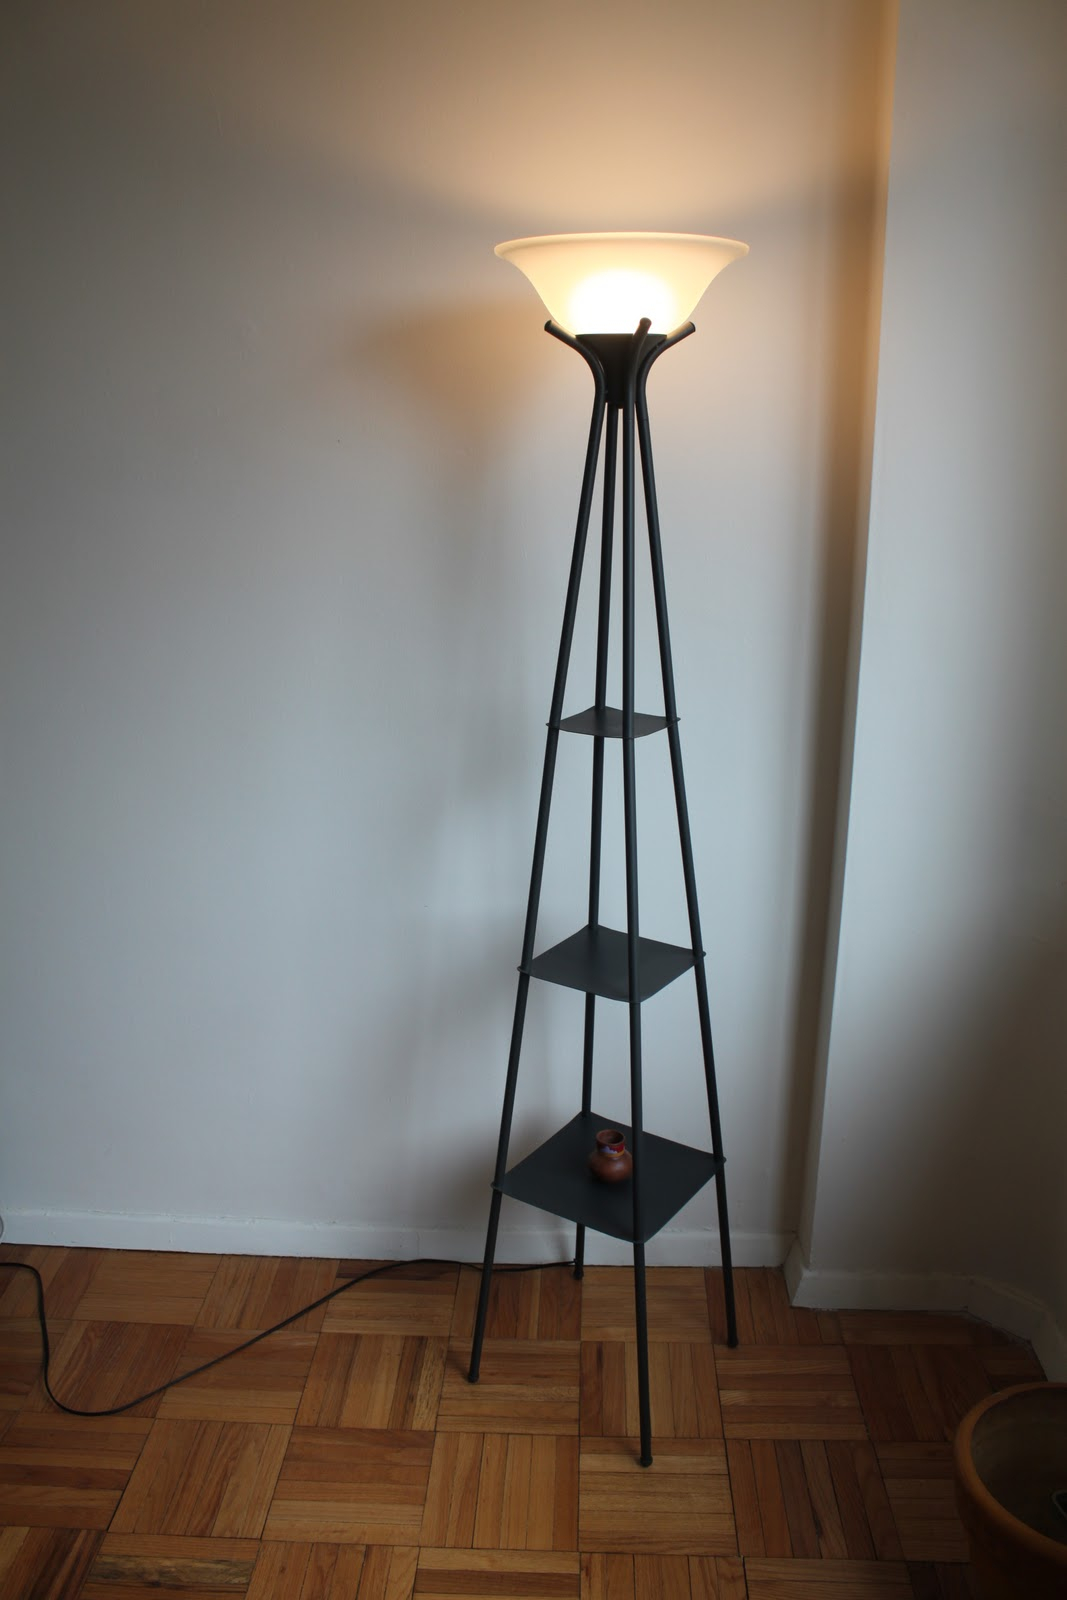 Floor Lamp With Shelves Tall Disacode Home Design From inside sizing 1067 X 1600